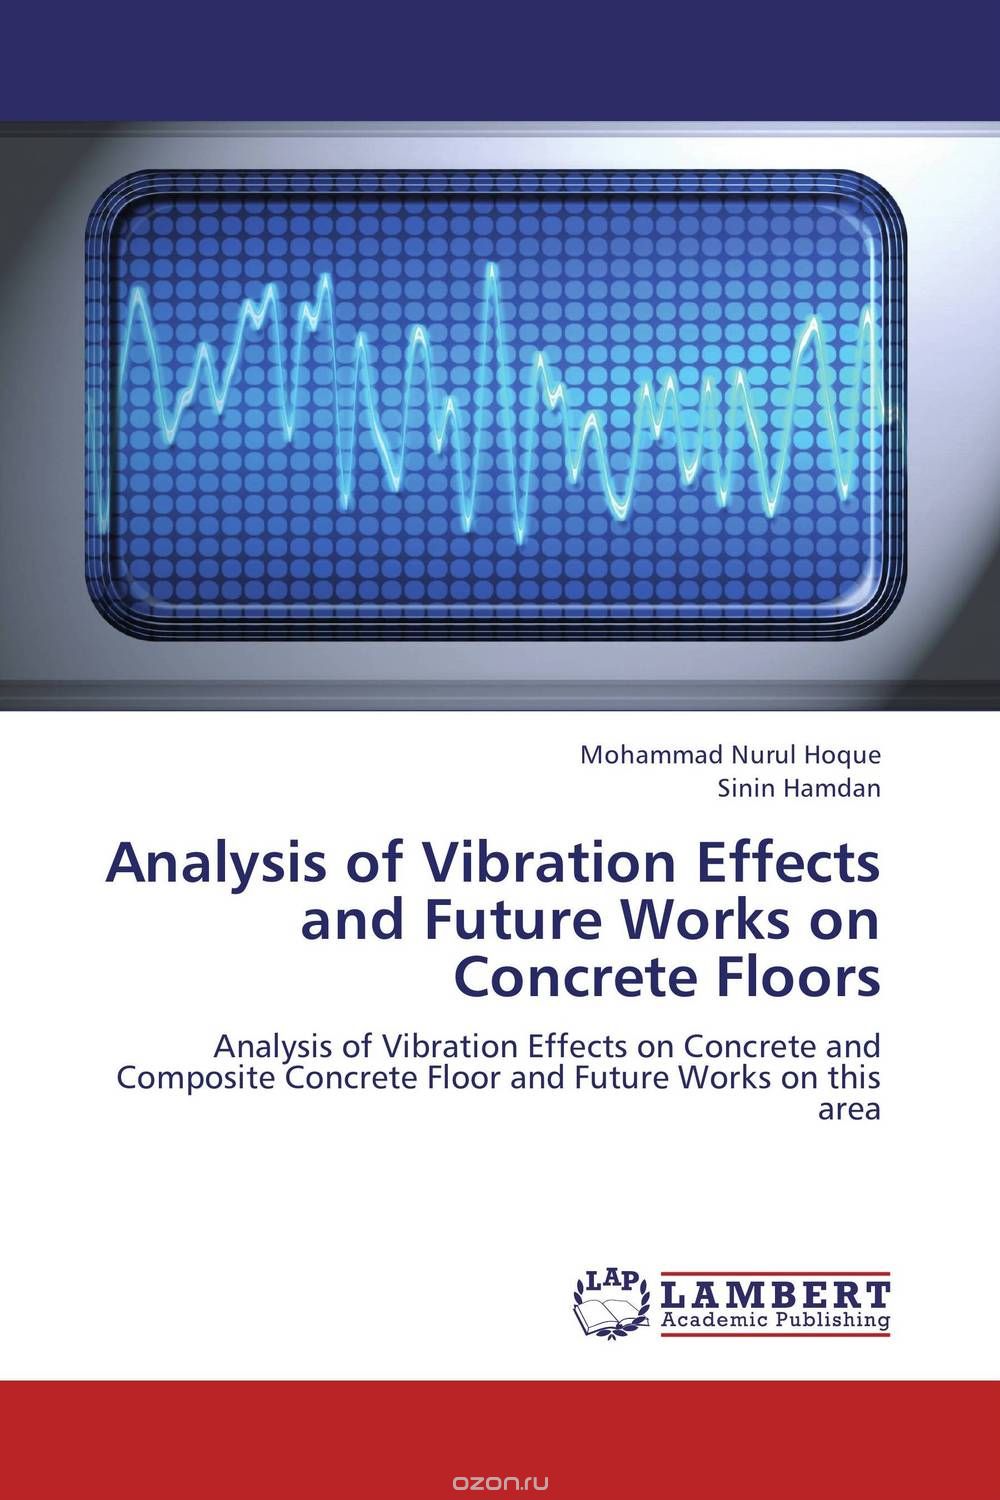 Analysis of Vibration Effects and Future Works on Concrete Floors